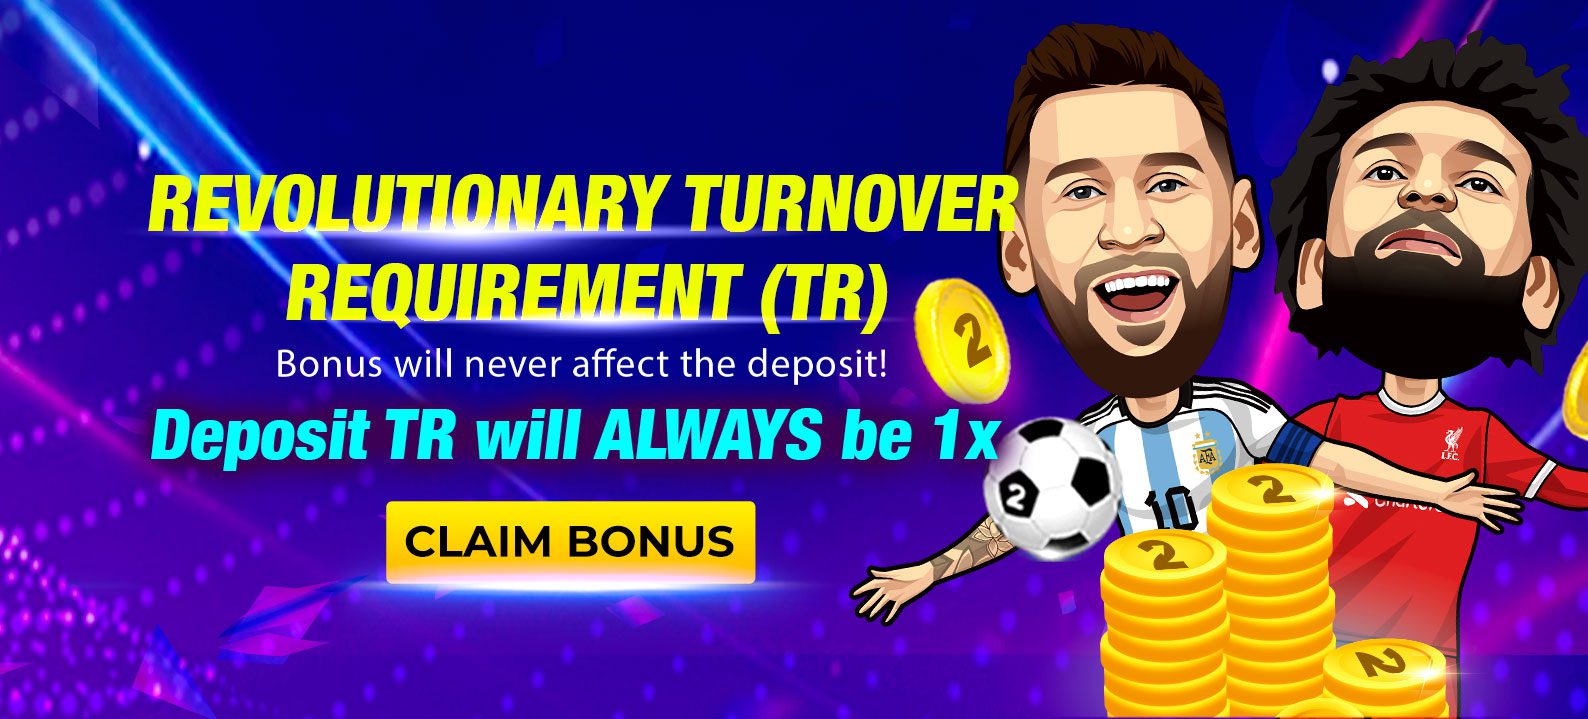 Revolutionaly Turnover Requirement